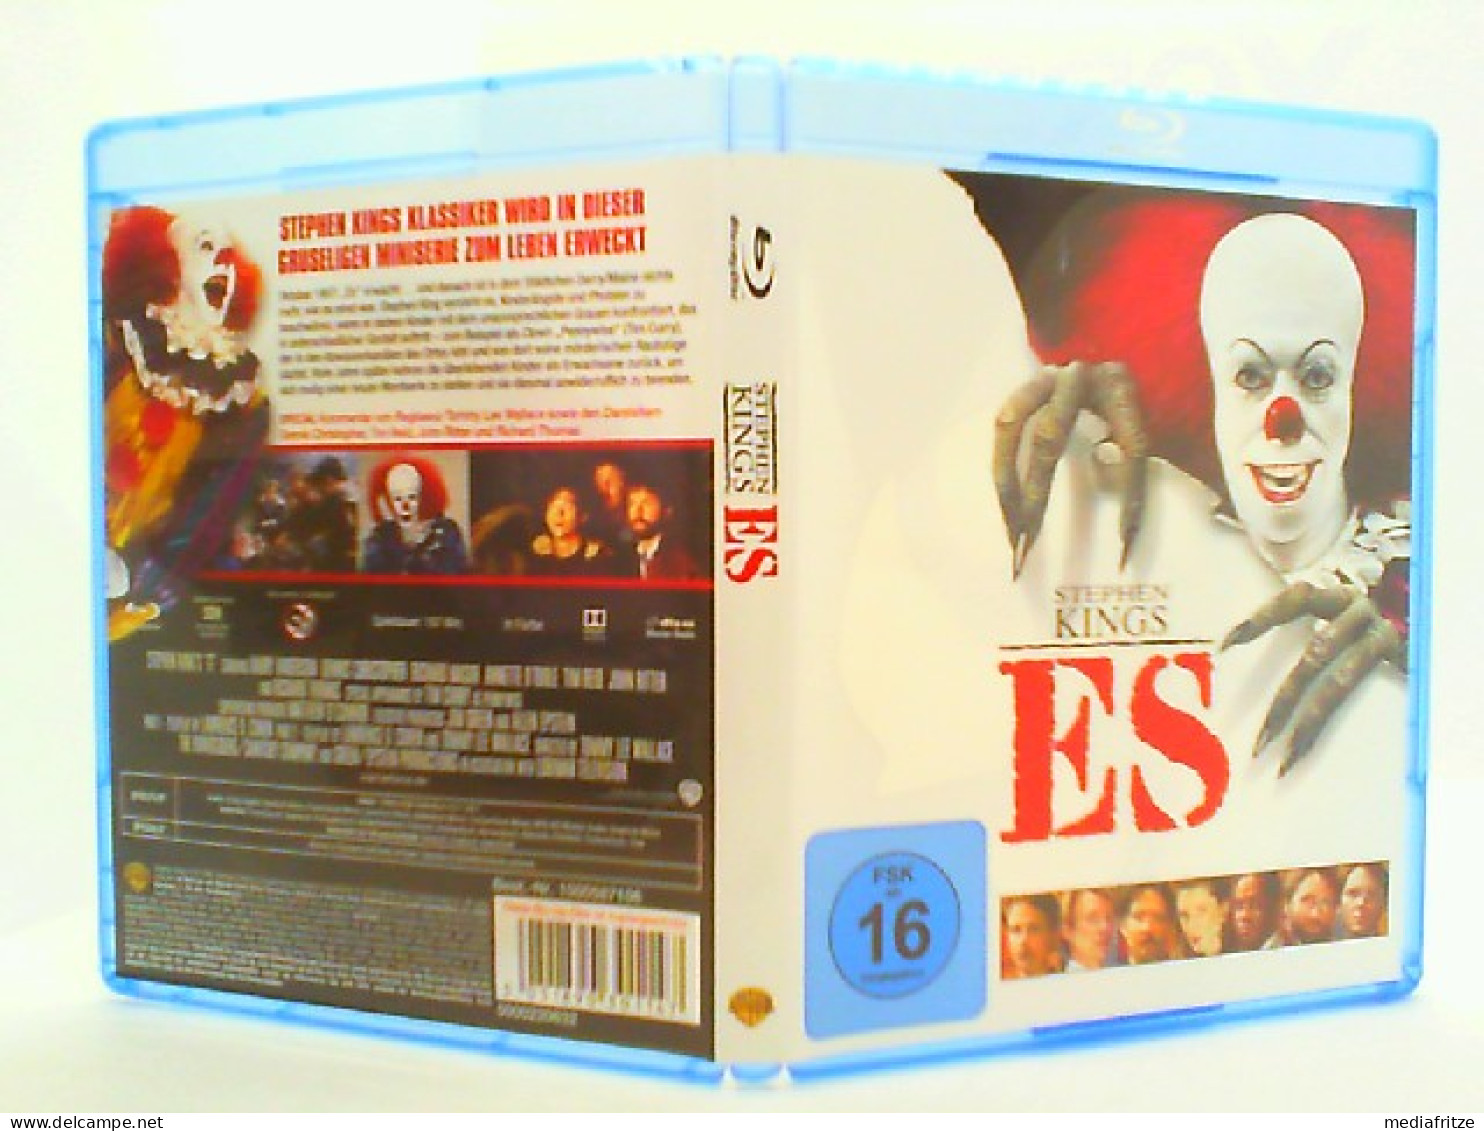 Stephen King's Es [Blu-ray] - Other Formats